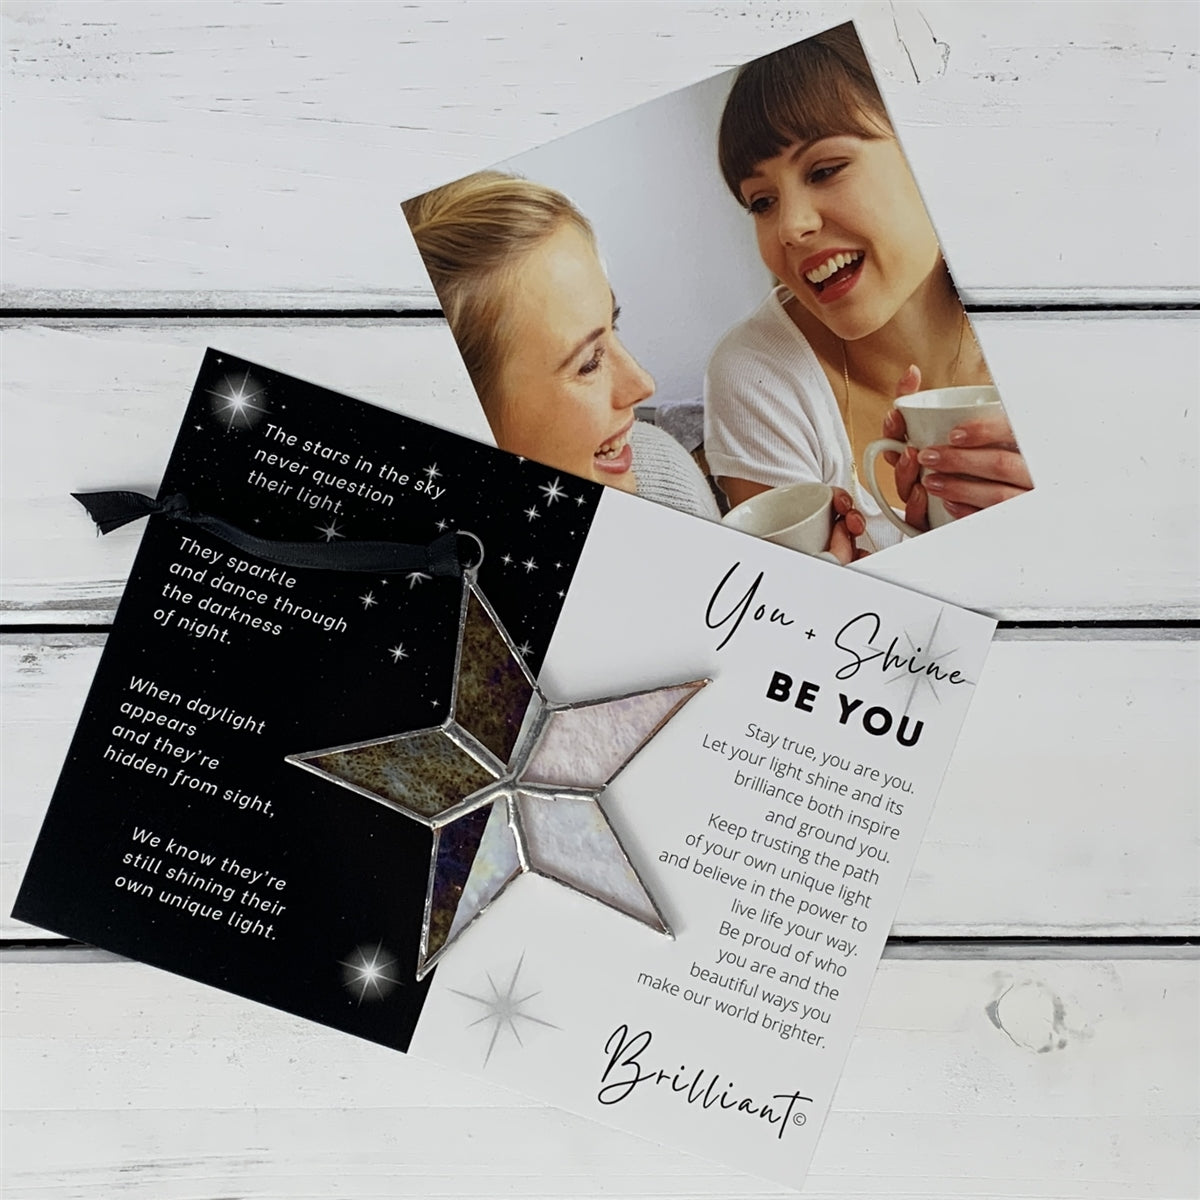 Be You star and artwork with the &quot;You + Shine&quot; poem on the left side and the &quot;Be You&quot; sentiment on the right side.